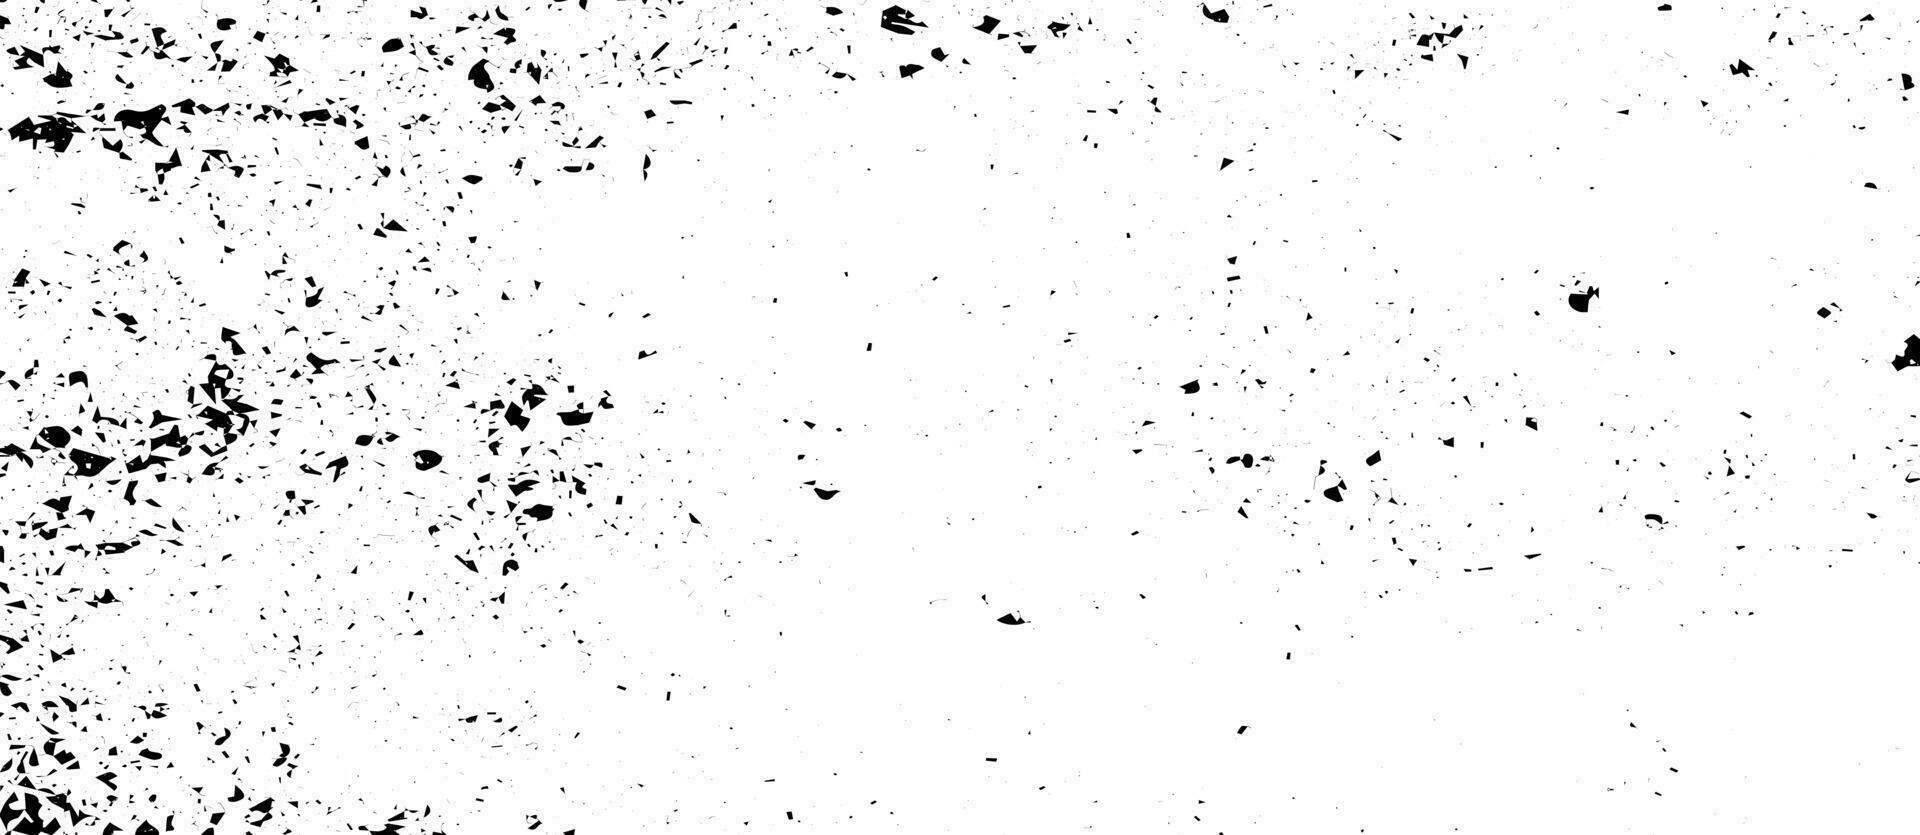 Minimalistic eggshell texture. Vintage grunge background with speckles, dots, flecks and particles. Vector illustration